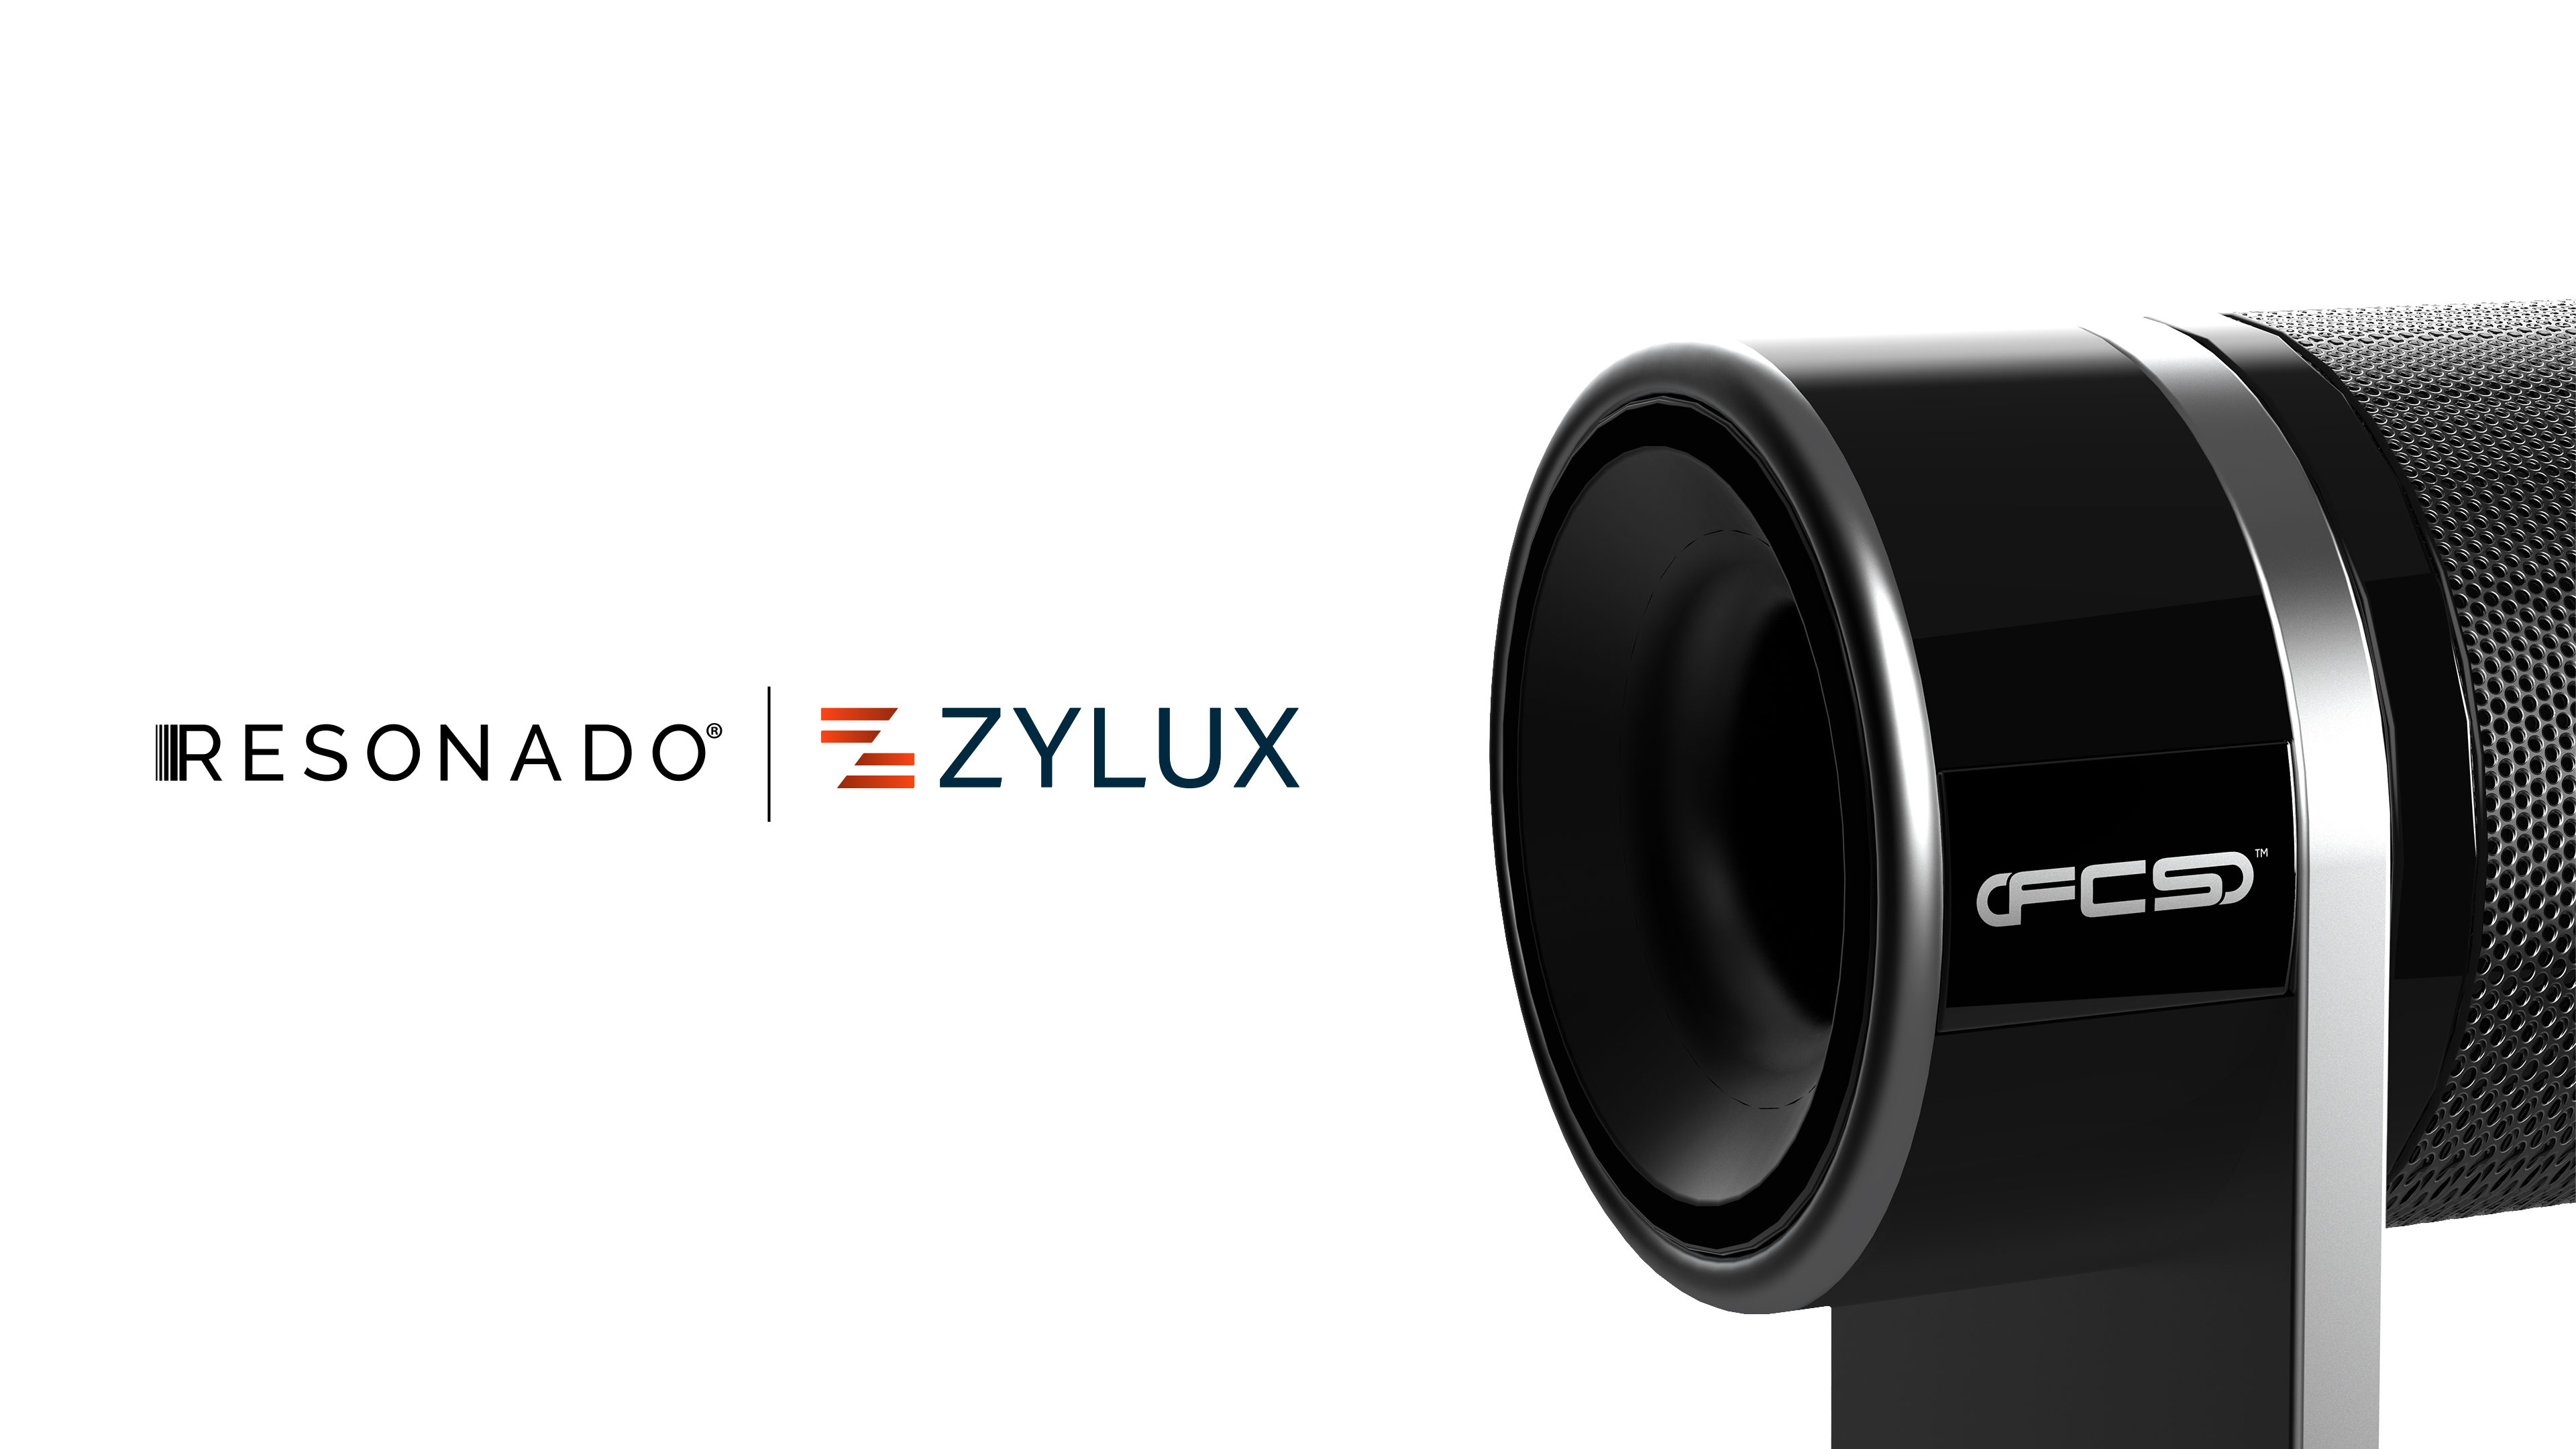 Breakthrough Audio Technology Company, Resonado, Announces Licensing Partnership with Leading Audio Manufacturer, Zylux